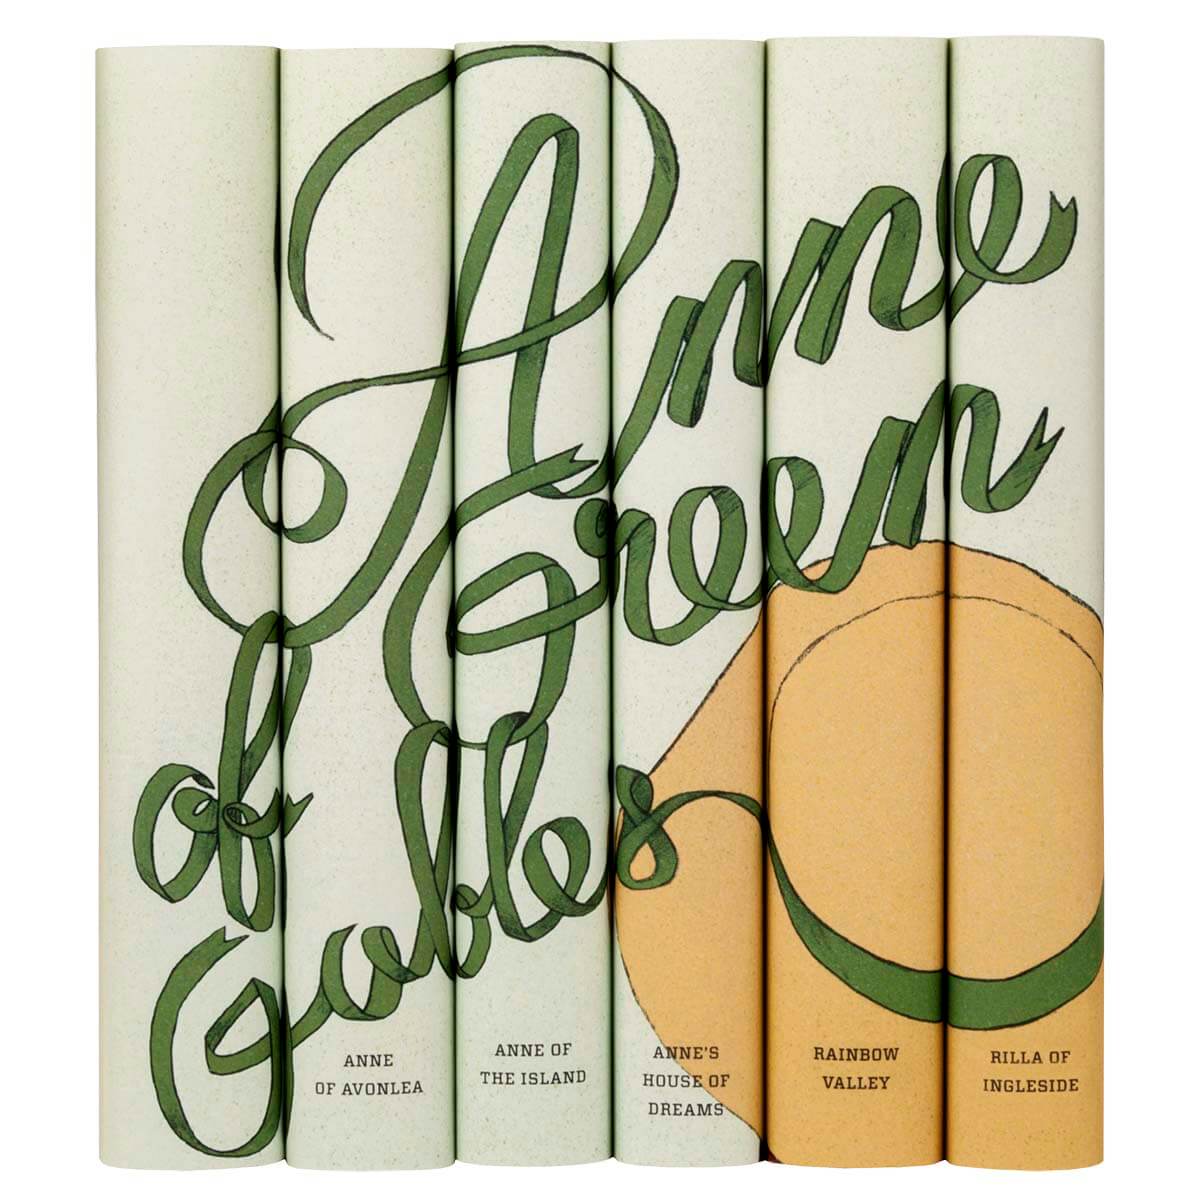 Green　Set　Gables　Book　Anne　of